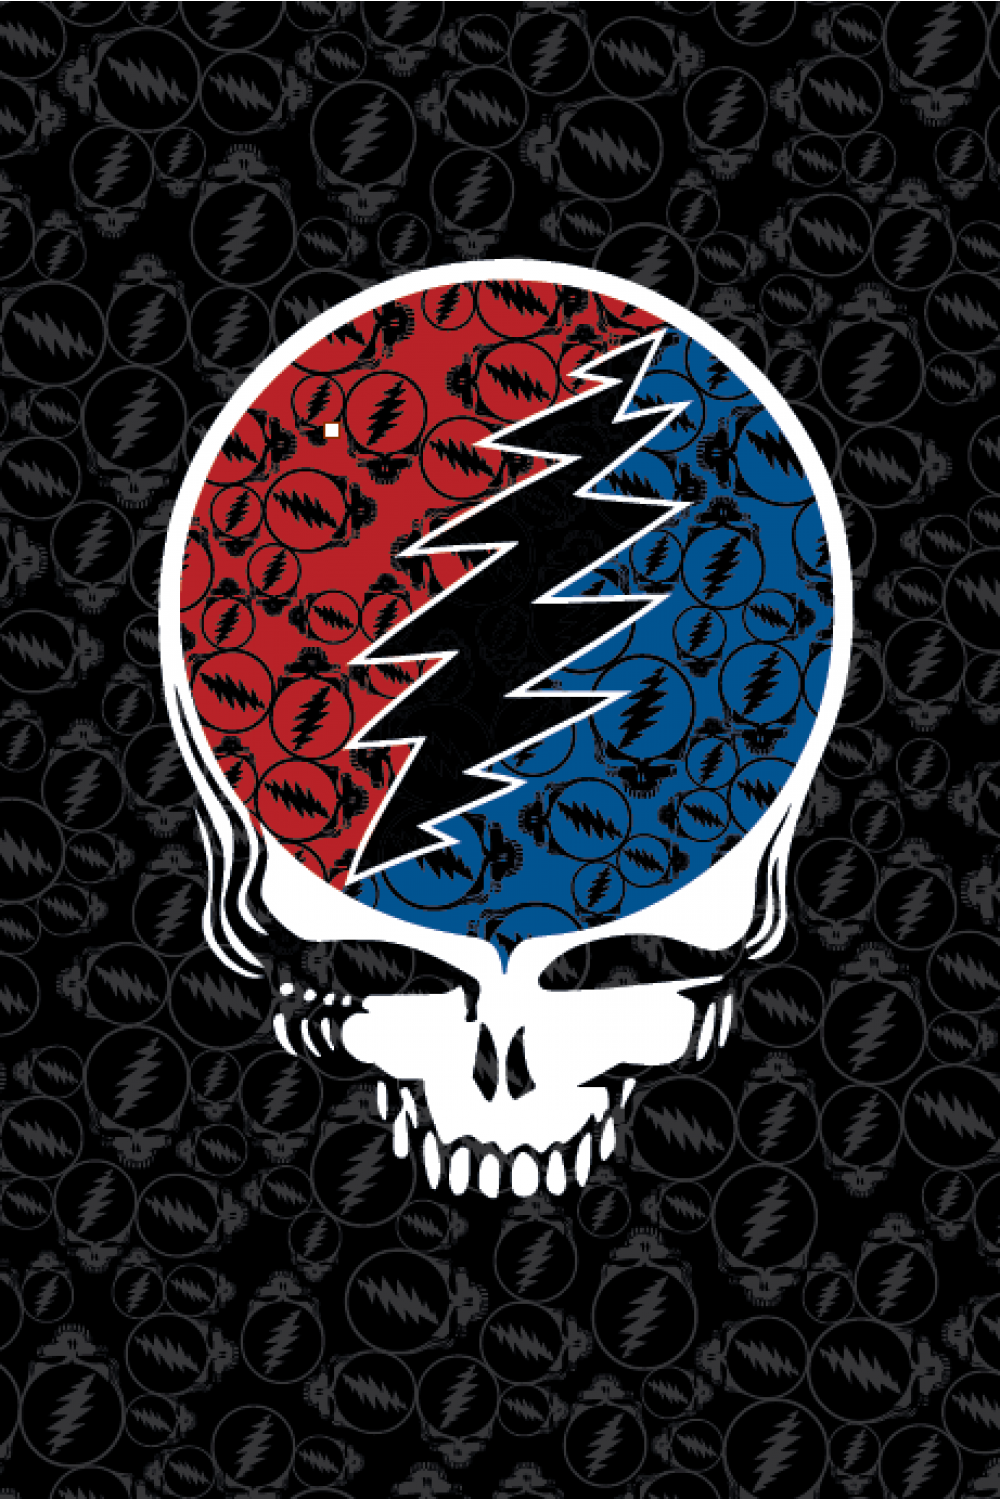 Grateful Dead Steal Your Face Tapestry 52x80